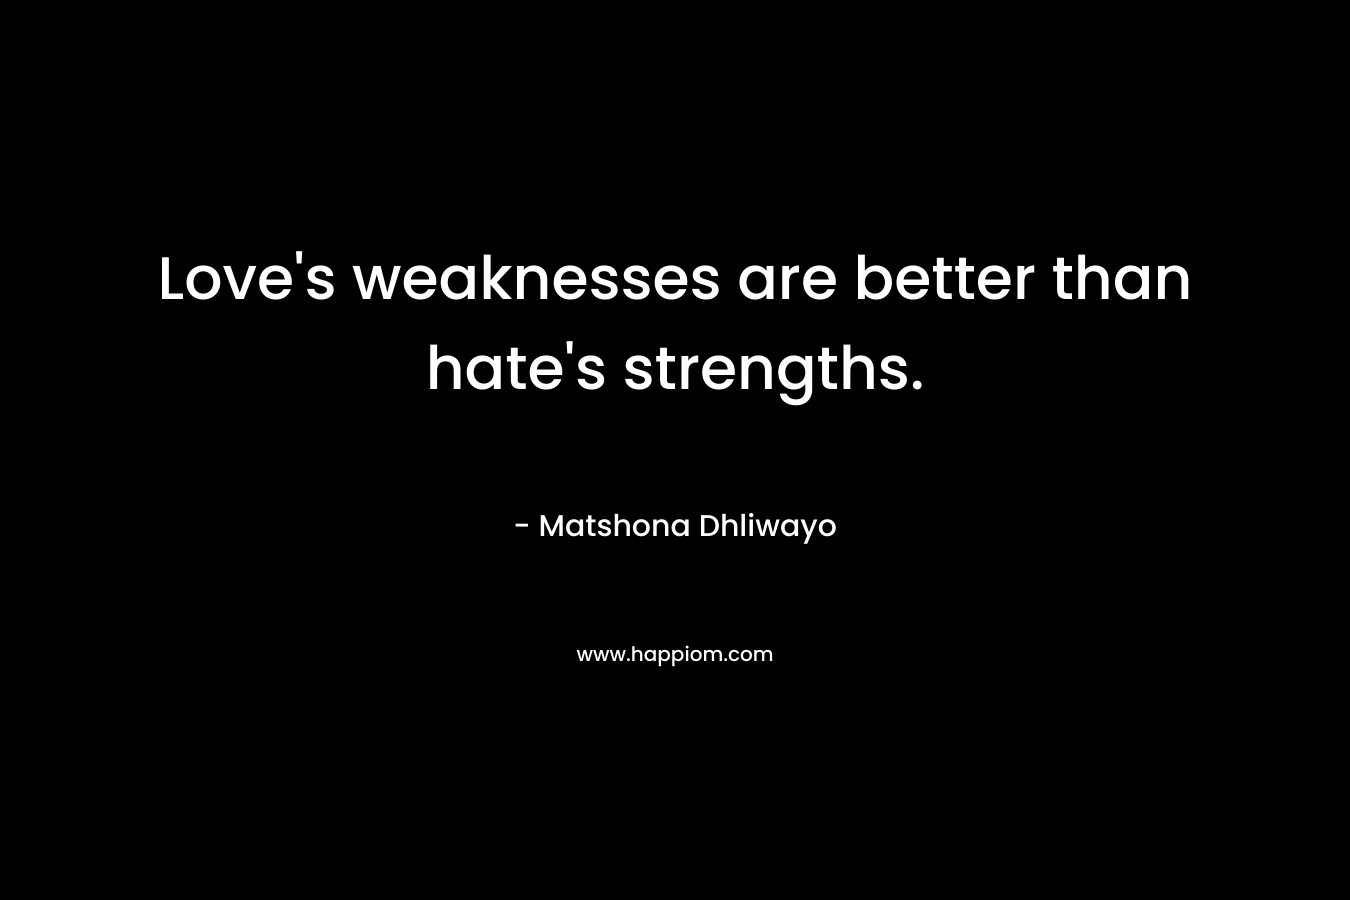 Love's weaknesses are better than hate's strengths.